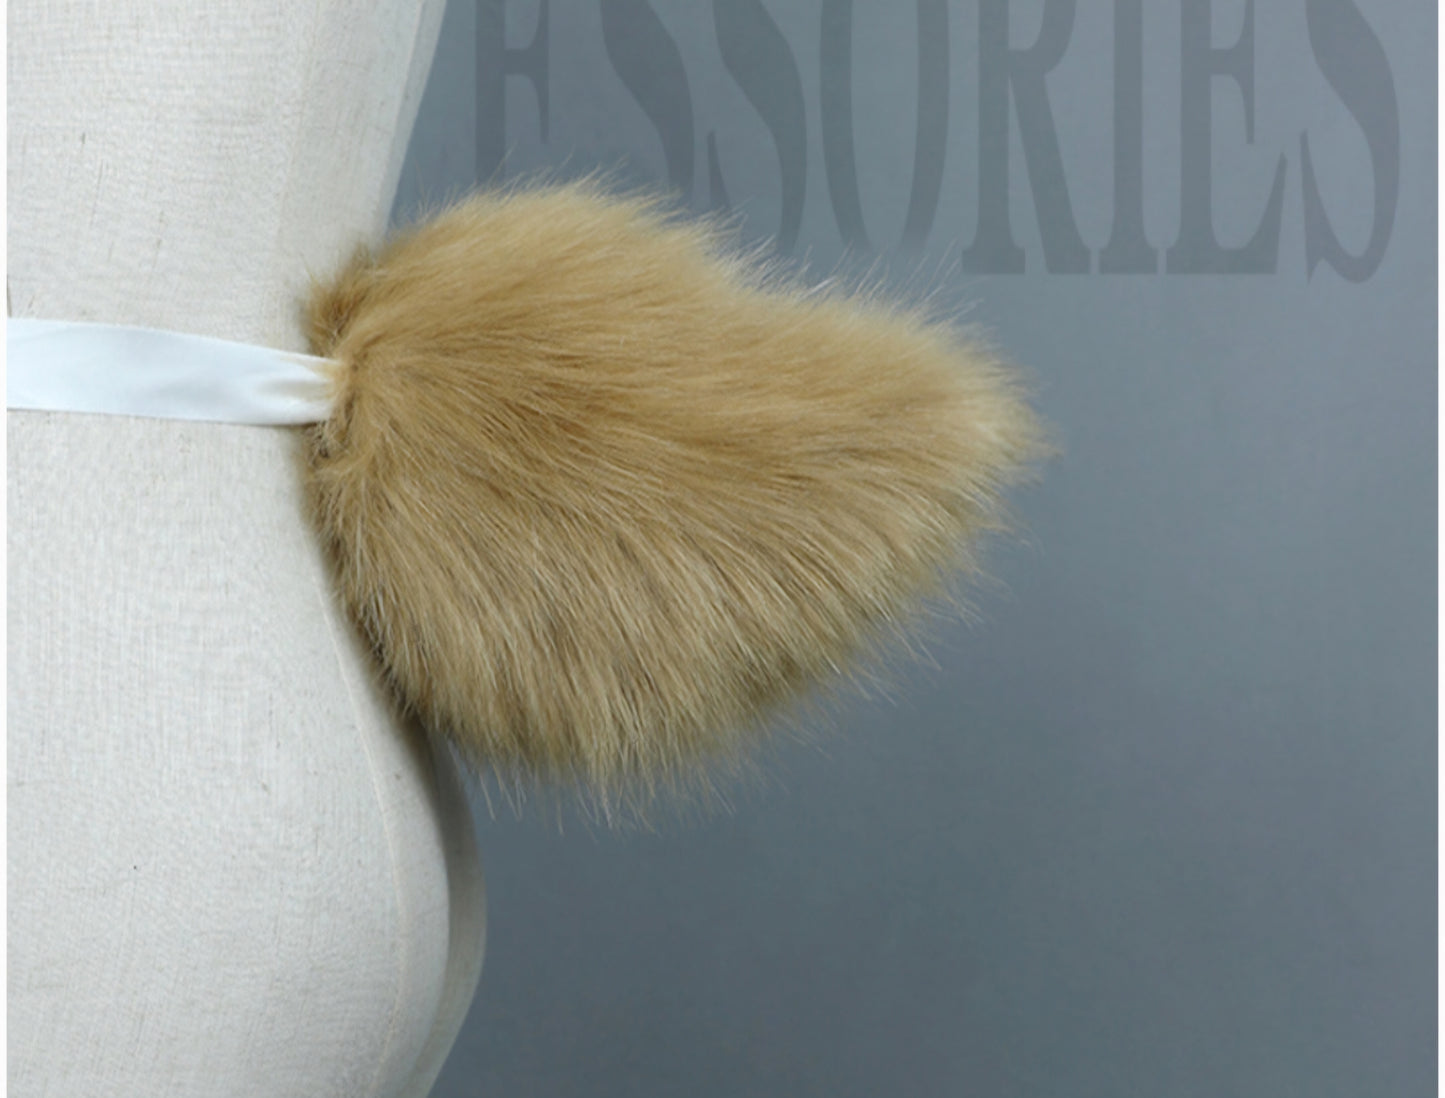 Puppy play tail, tail for puppy play. Beige small rabbit tail with waistband